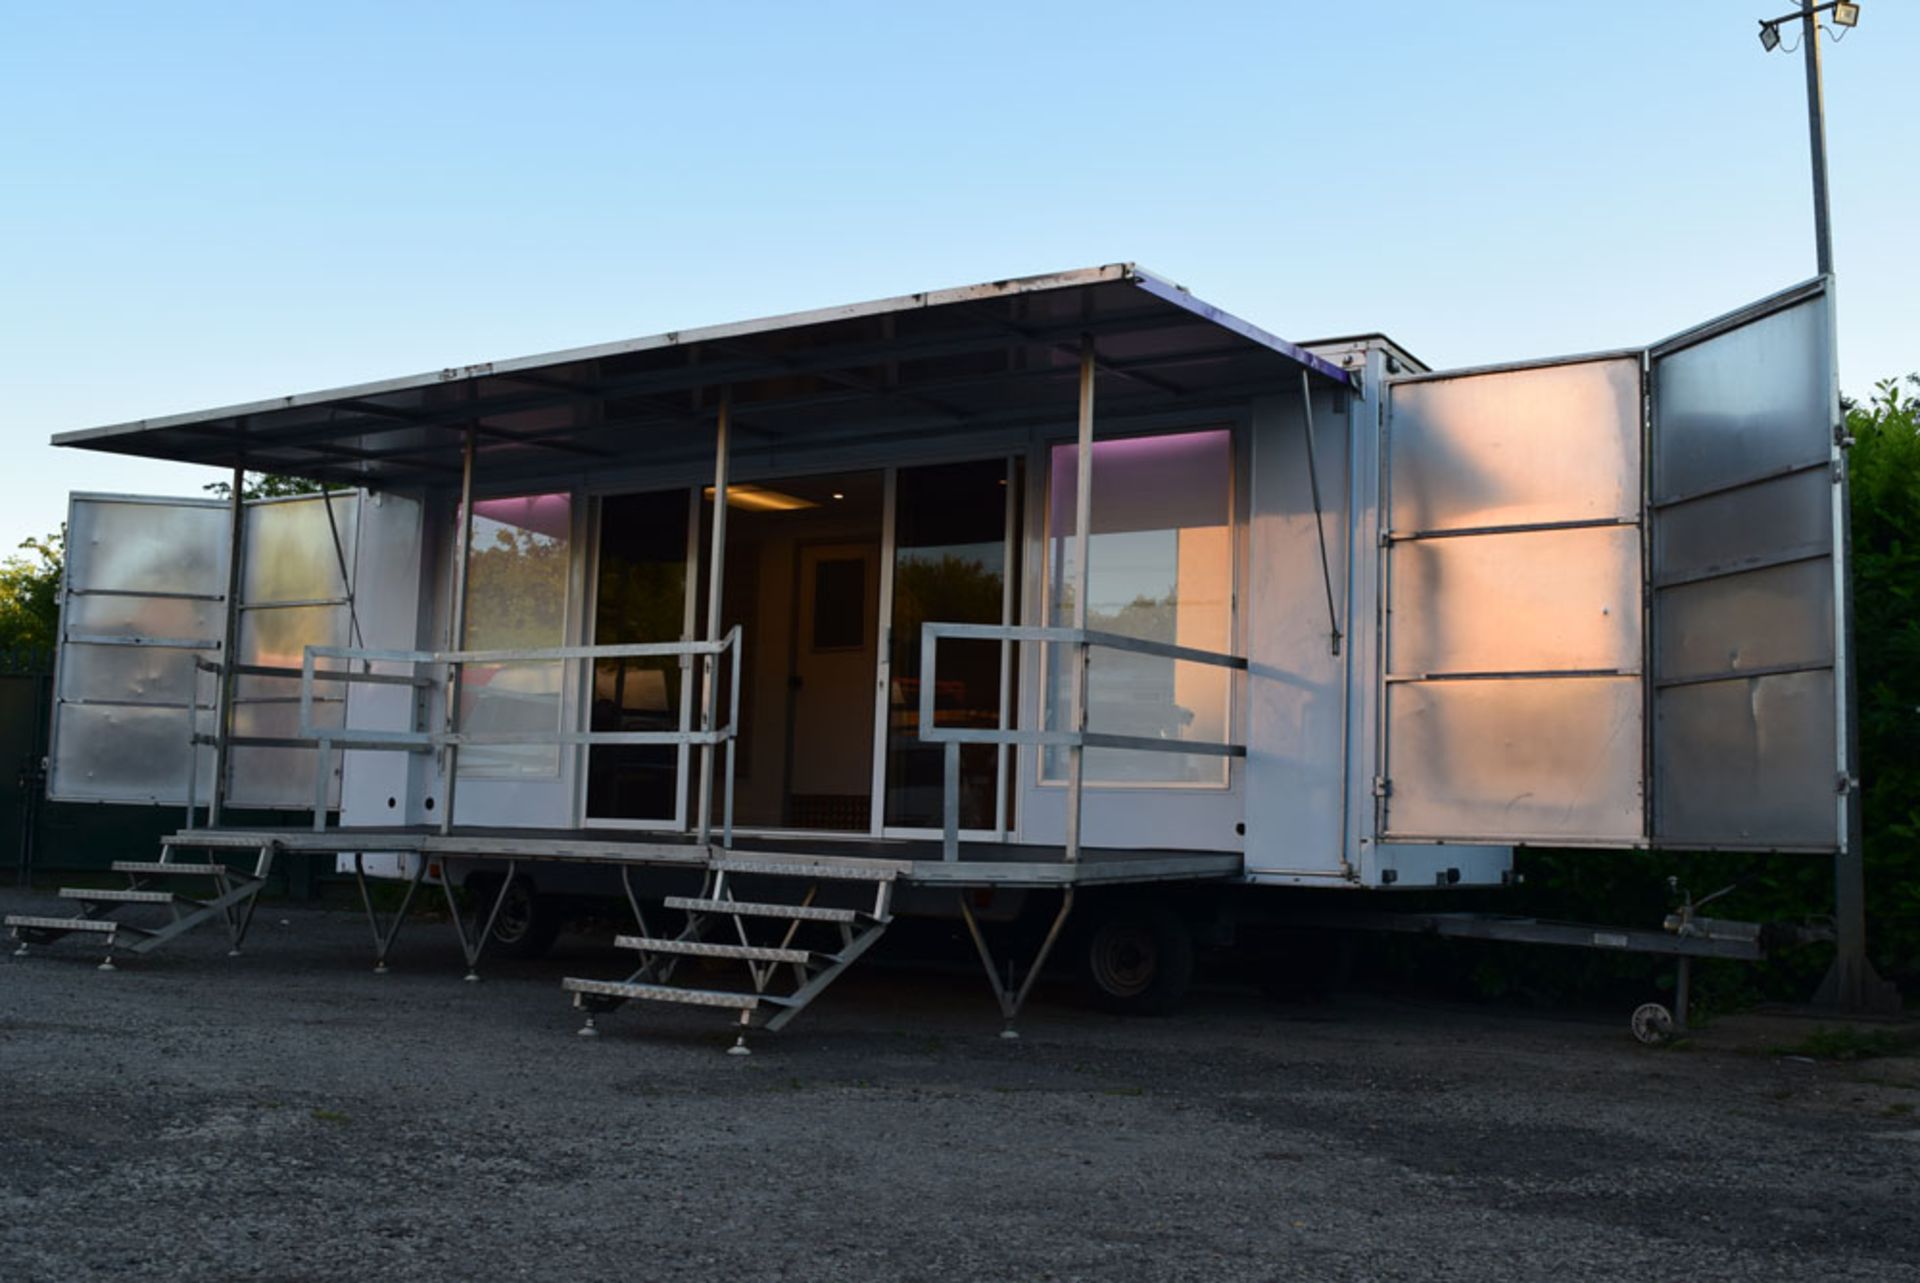 Torton 7 Meter Exhibition Show Hospitality Trailer (3.5 tonne trailer) - Image 6 of 17